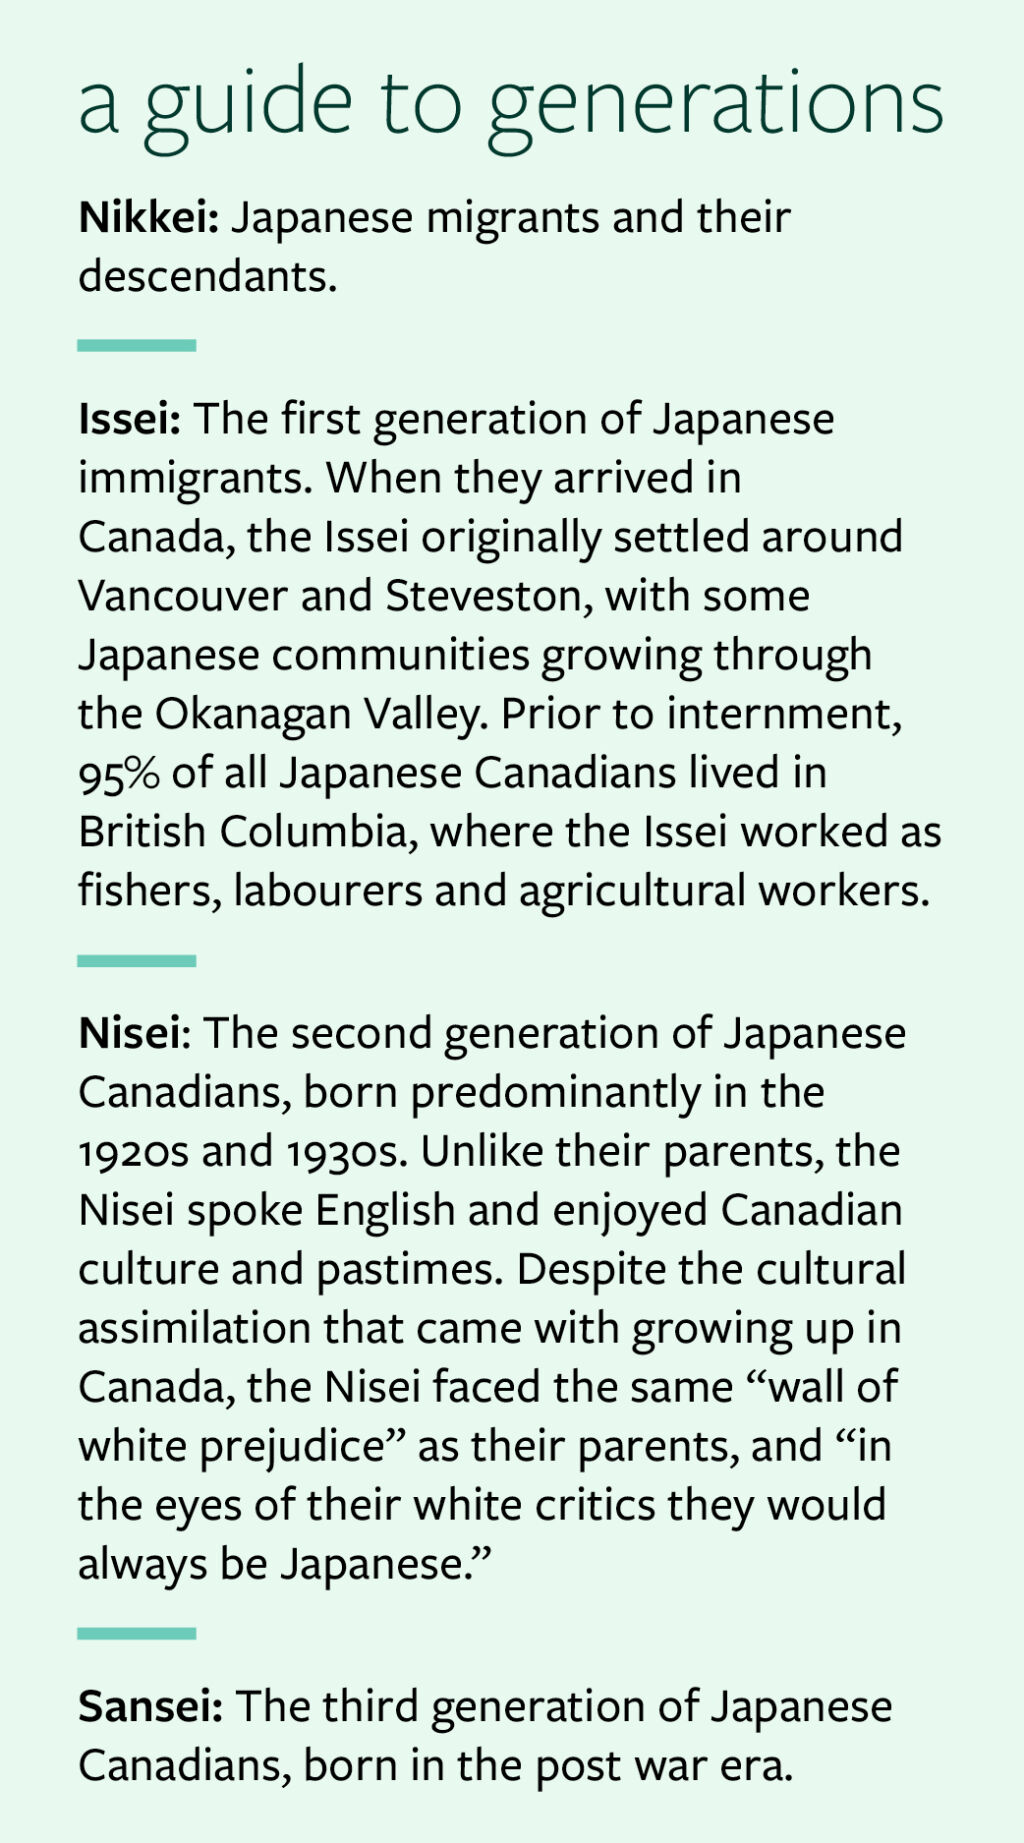 A guide to generations: Nikkei: Japanese migrants and their descendants.  Issei: The first generation of Japanese immigrants. When they arrived in Canada, the Issei originally settled around Vancouver and Steveston, with some Japanese communities growing through the Okanagan Valley. Prior to internment, 95% of all Japanese Canadians lived in British Columbia, where the Issei worked as fishers, labourers and agricultural workers. Nisei: The second generation of Japanese Canadians, born predominantly in the 1920s and 1930s. Unlike their parents, the Nisei spoke English and enjoyed Canadian culture and pastimes. Despite the cultural assimilation that came with growing up in Canada, the Nisei faced the same “wall of white prejudice” as their parents, and “in the eyes of their white critics they would always be Japanese.” Sansei: The third generation of Japanese Canadians, born in the post war era.